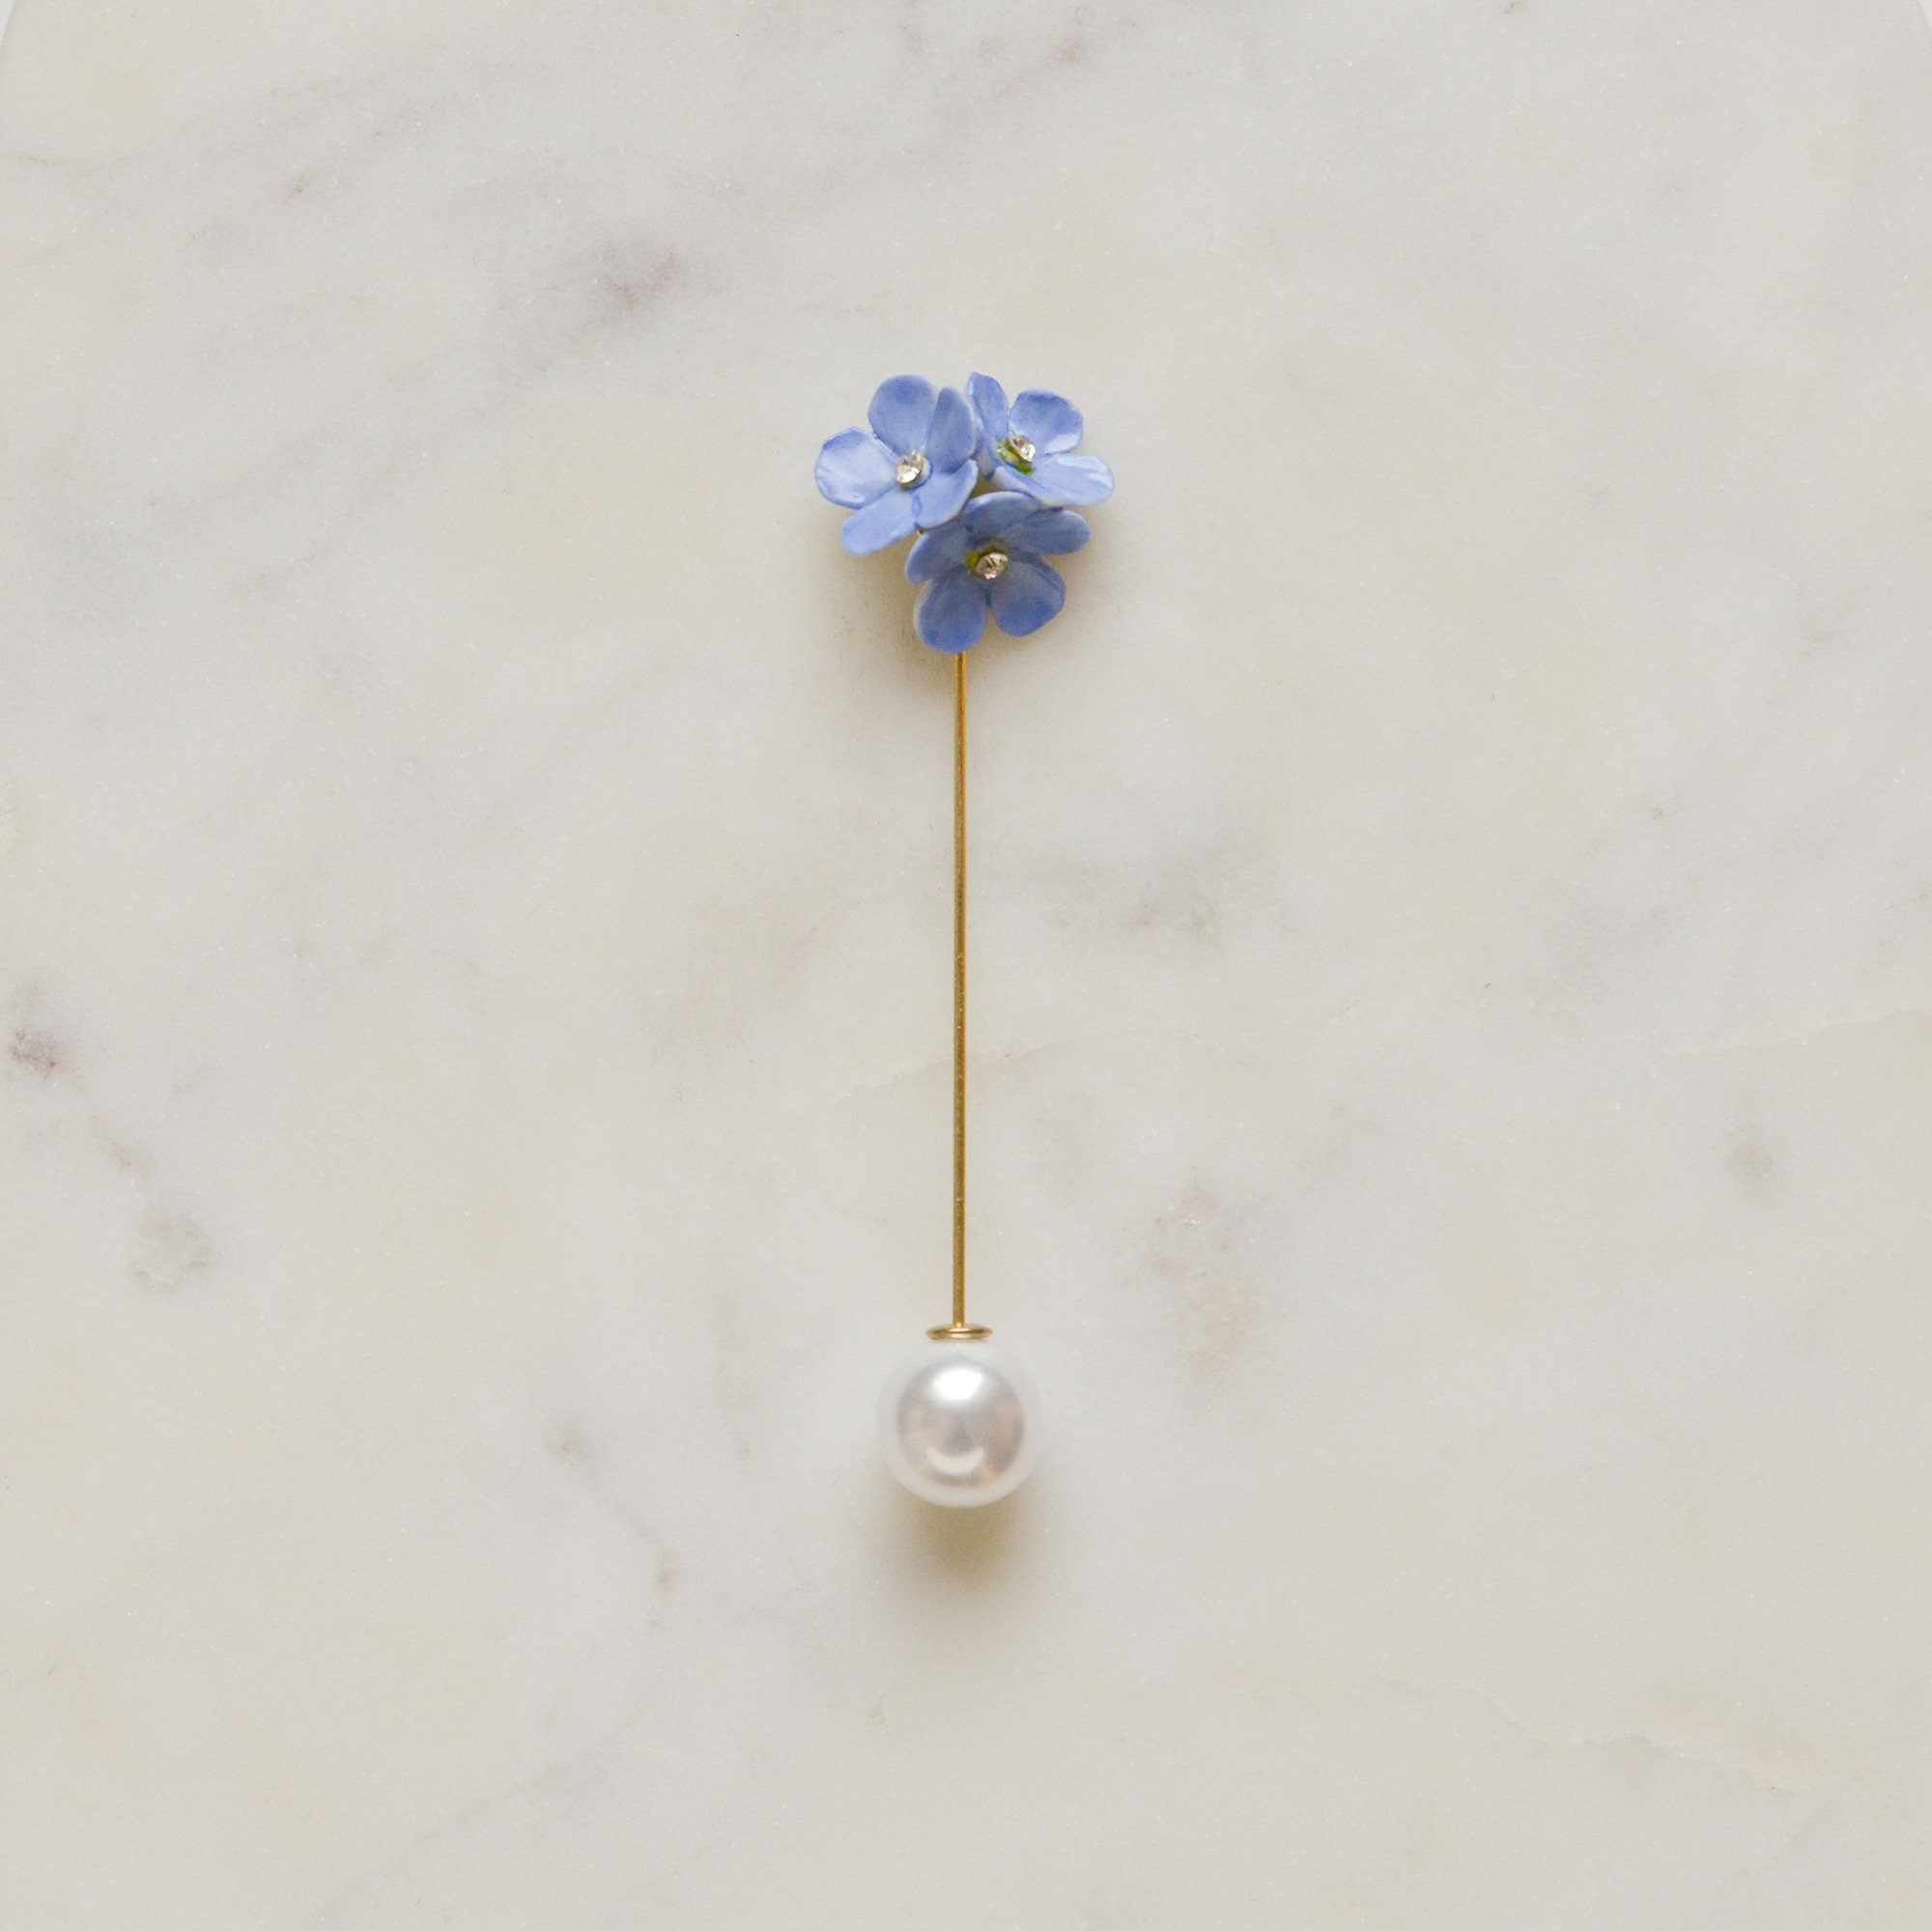 Porcelain Blue Forget Me Not Pin Brooch with Pearl Protector Brooches Hop Skip Flutter 